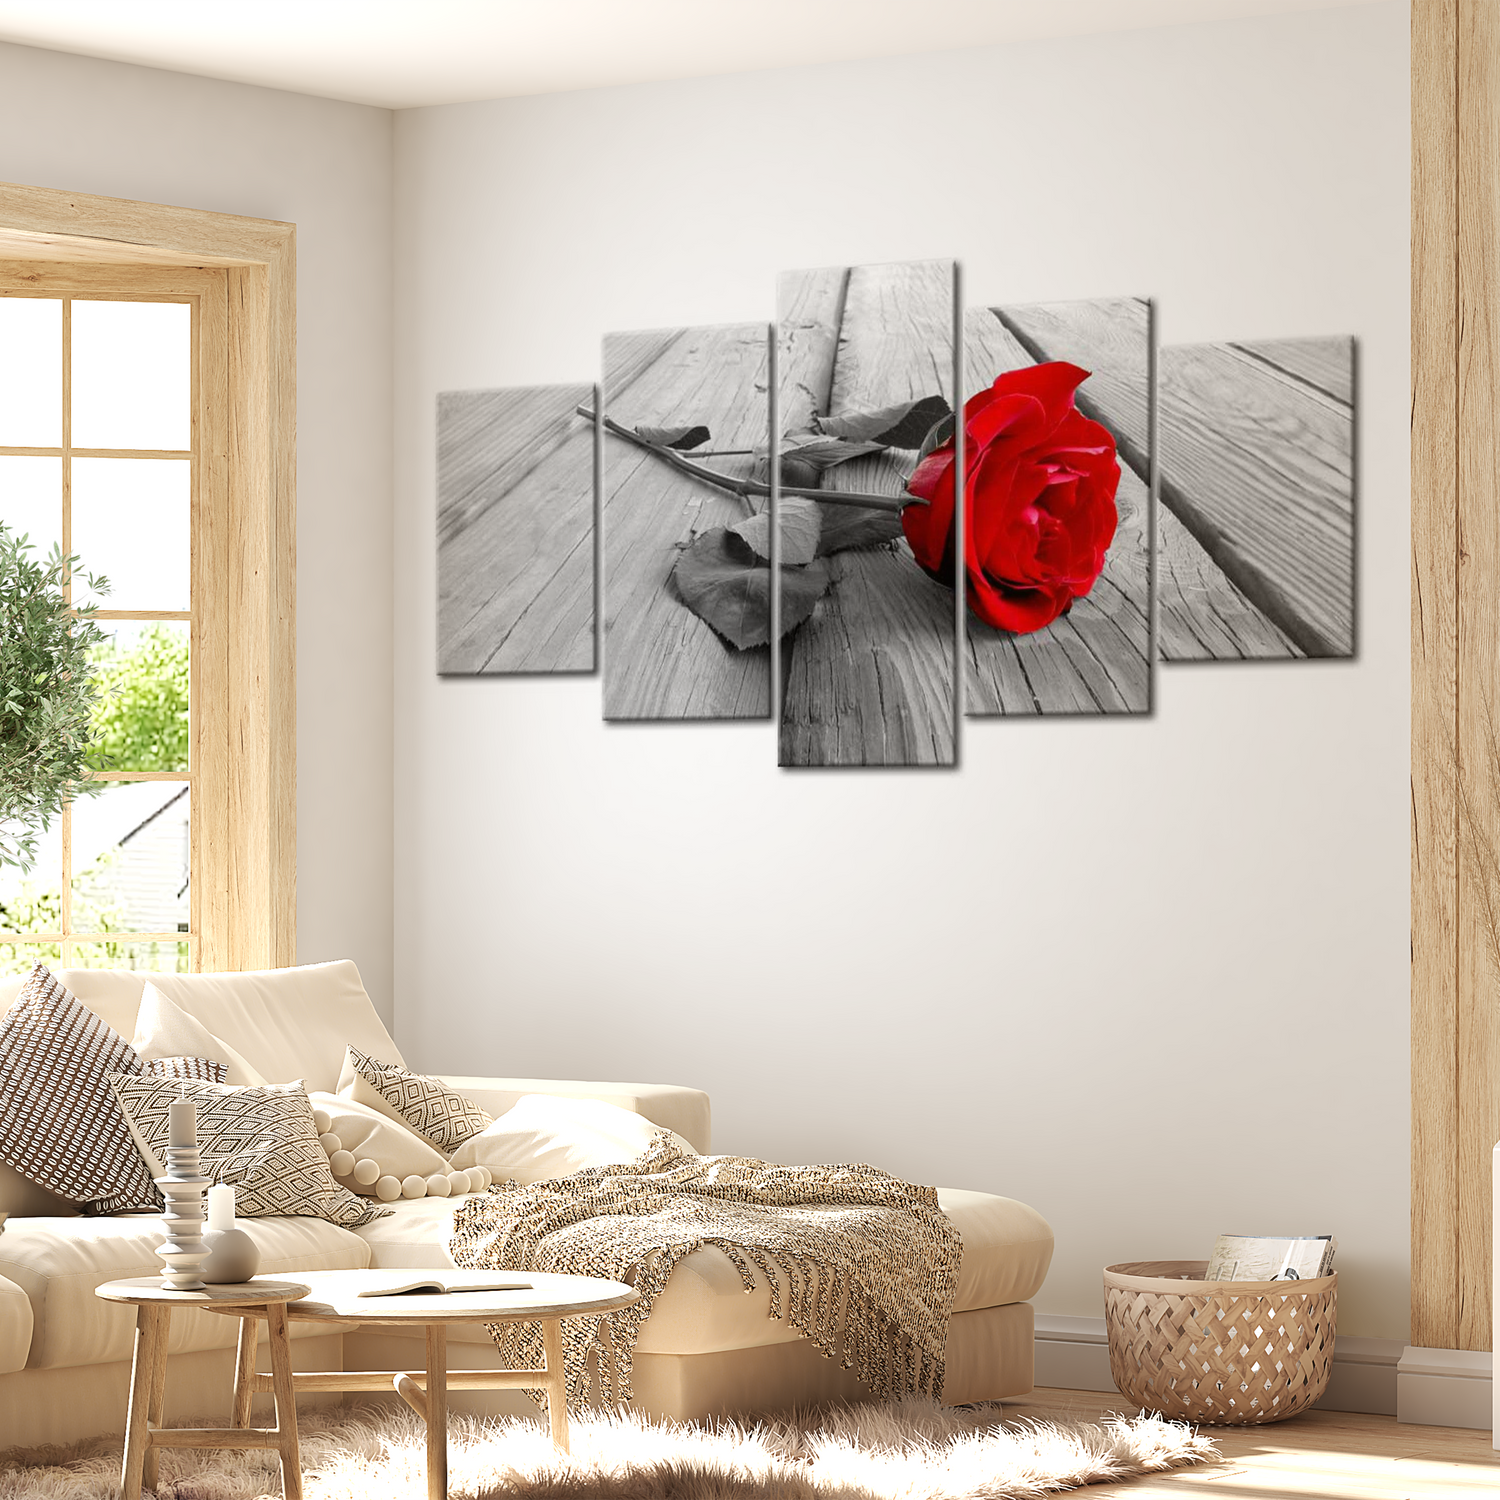 Stretched Canvas Floral Art - Rose On Wood Wide Red 40"Wx20"H